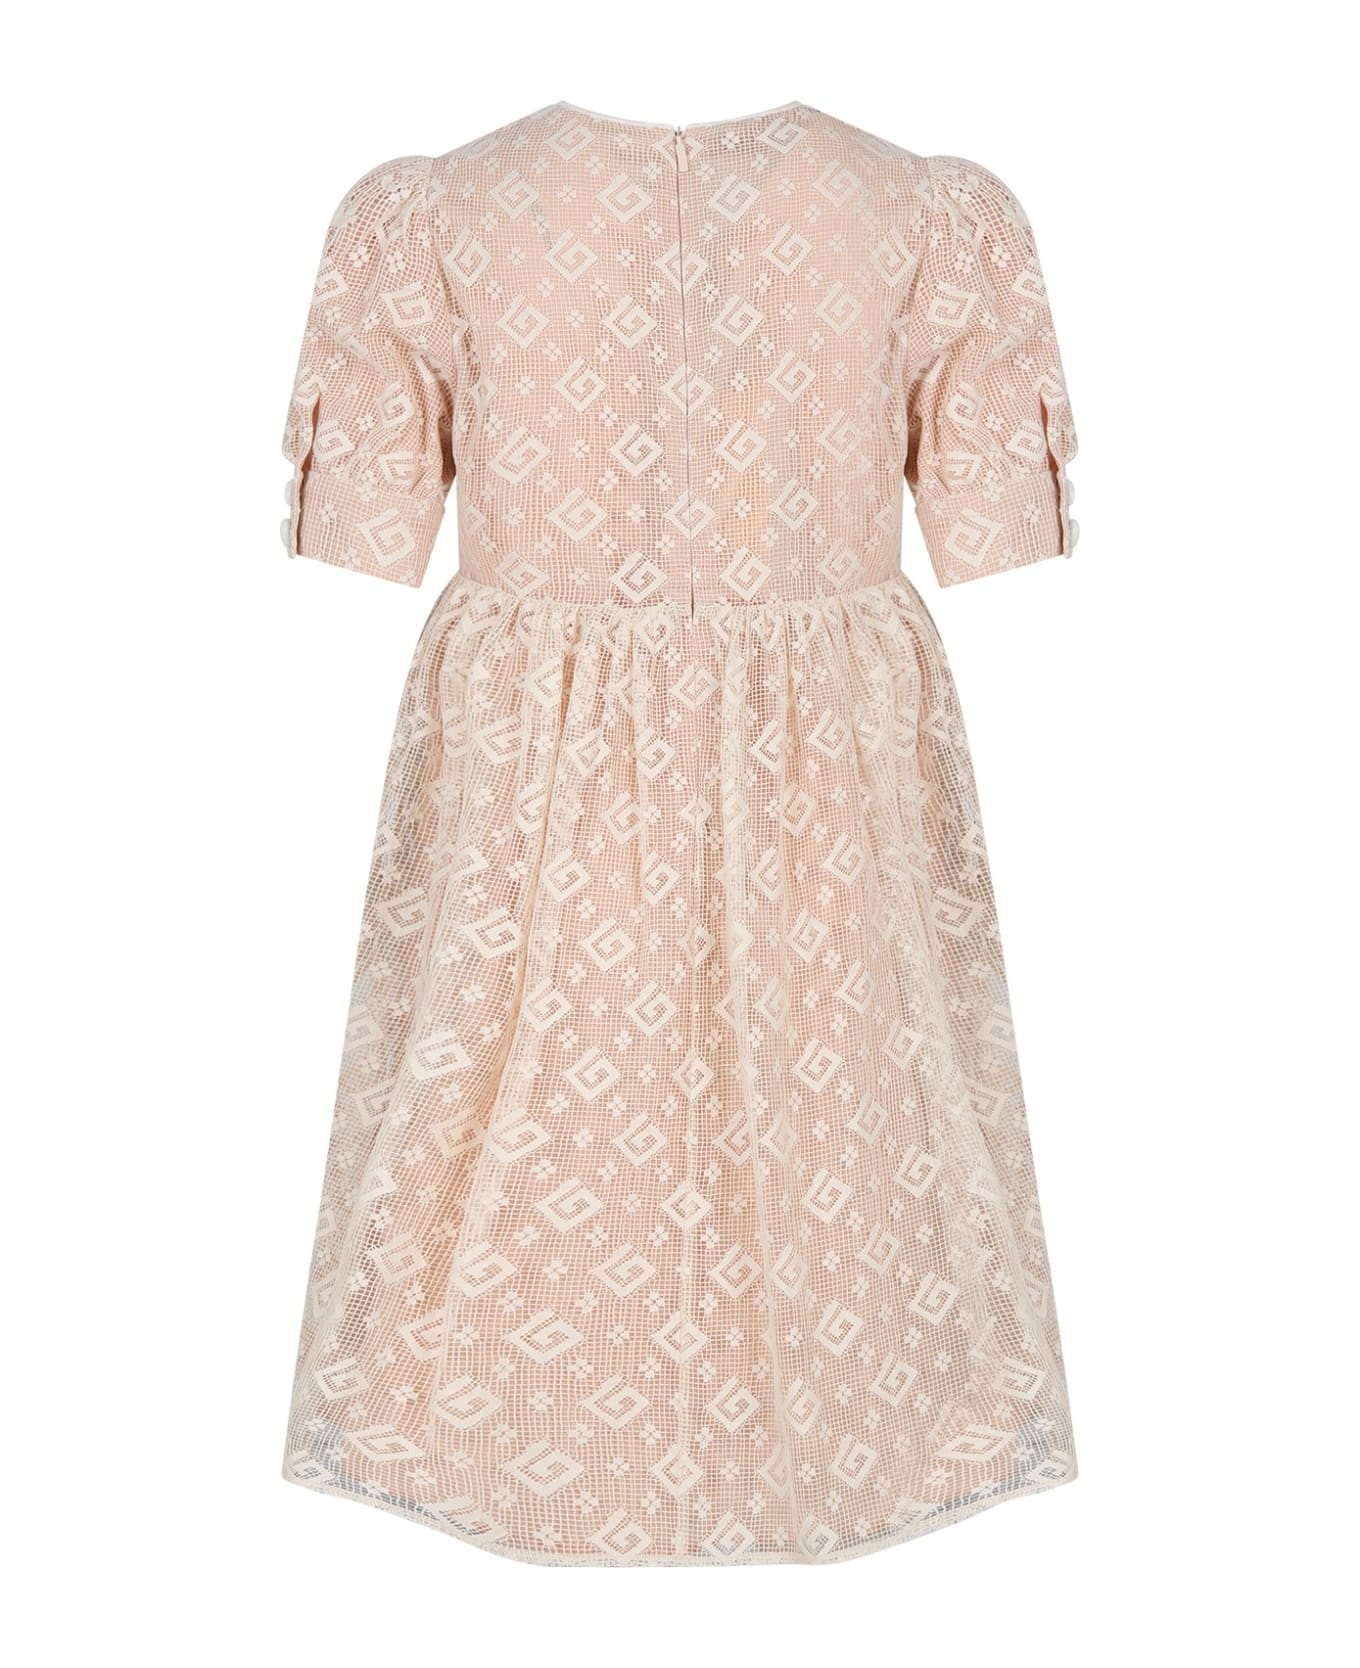 Gucci Pink Dress For Girl With G Quadro Motif - Pink ワンピース＆ドレス